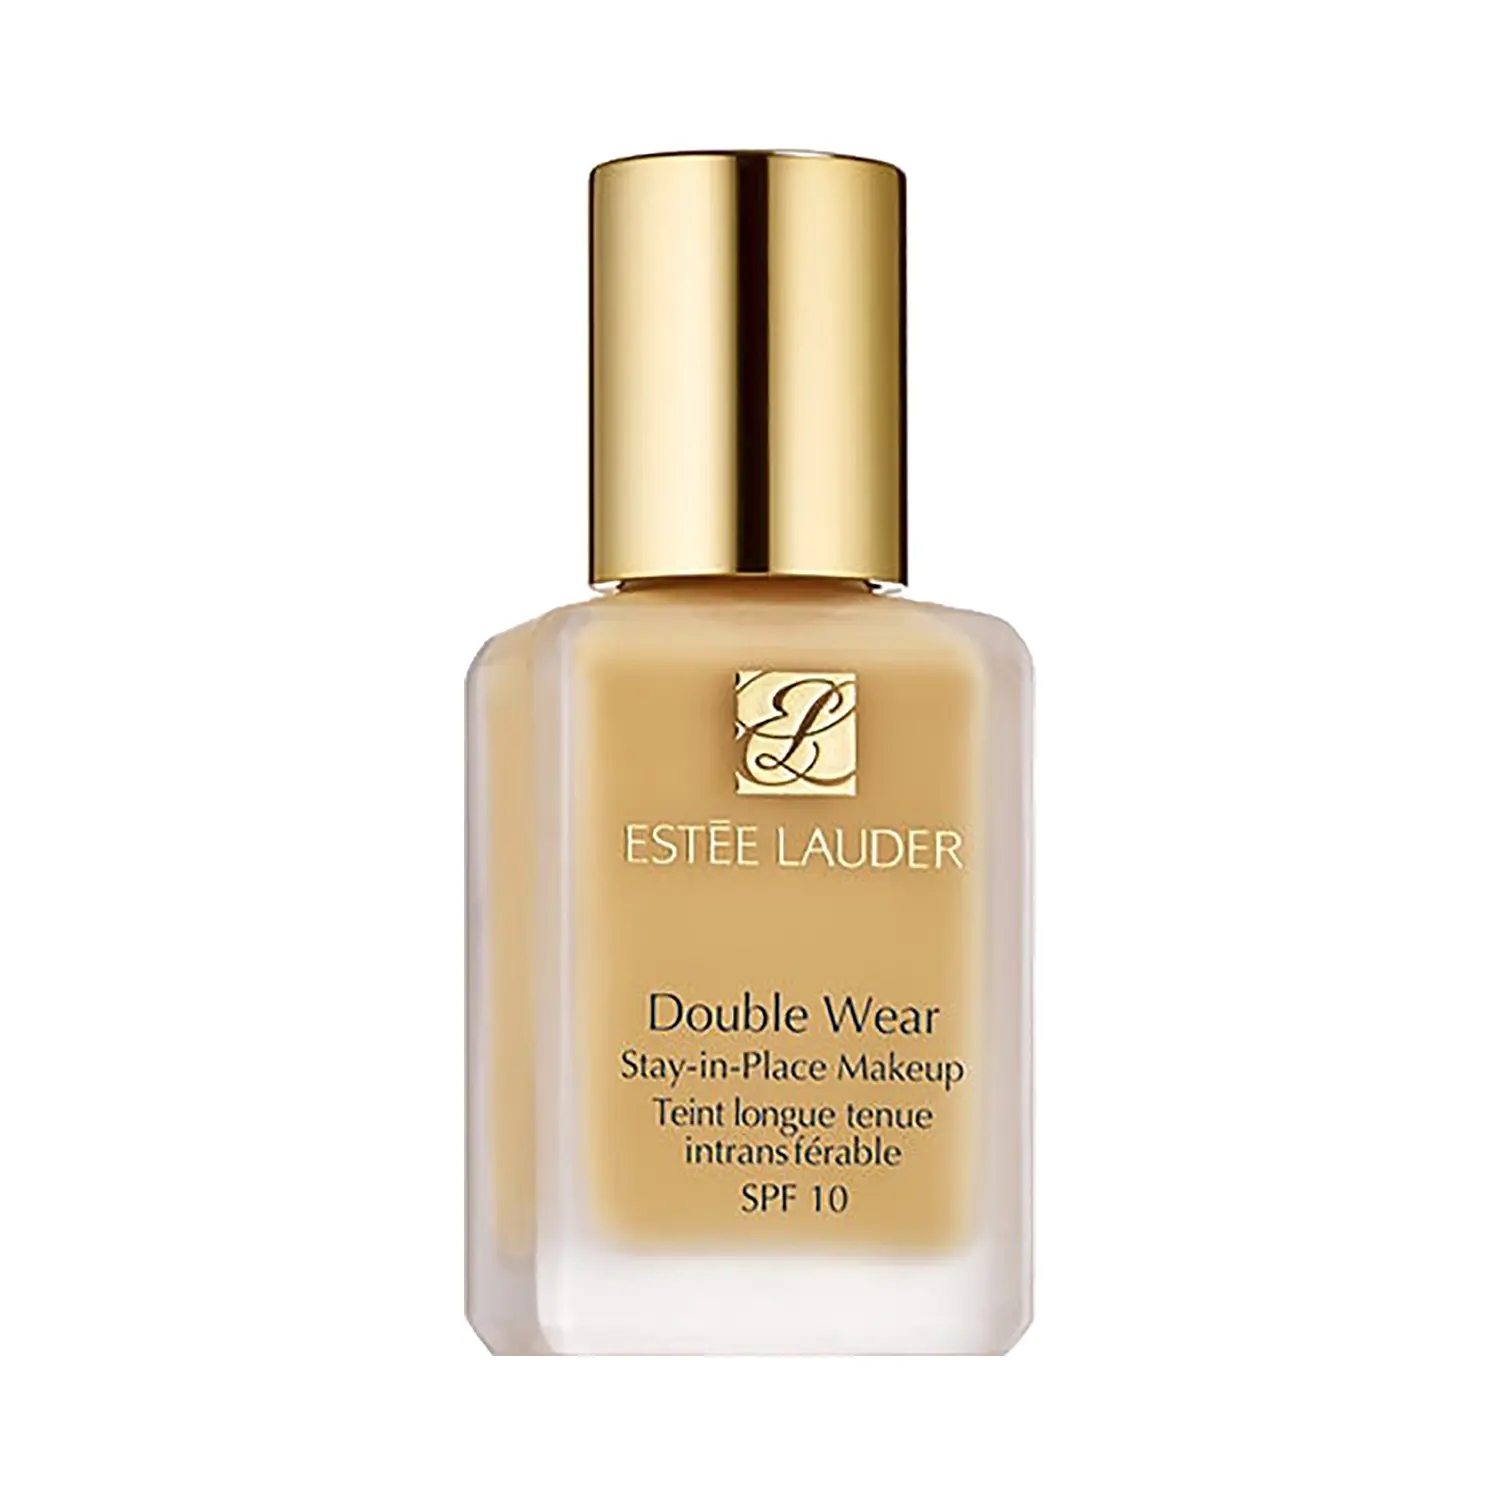 Estee Lauder | Estee Lauder Double Wear Stay-In-Place Makeup Foundation SPF10 - 3W1.5 Fawn (30ml)